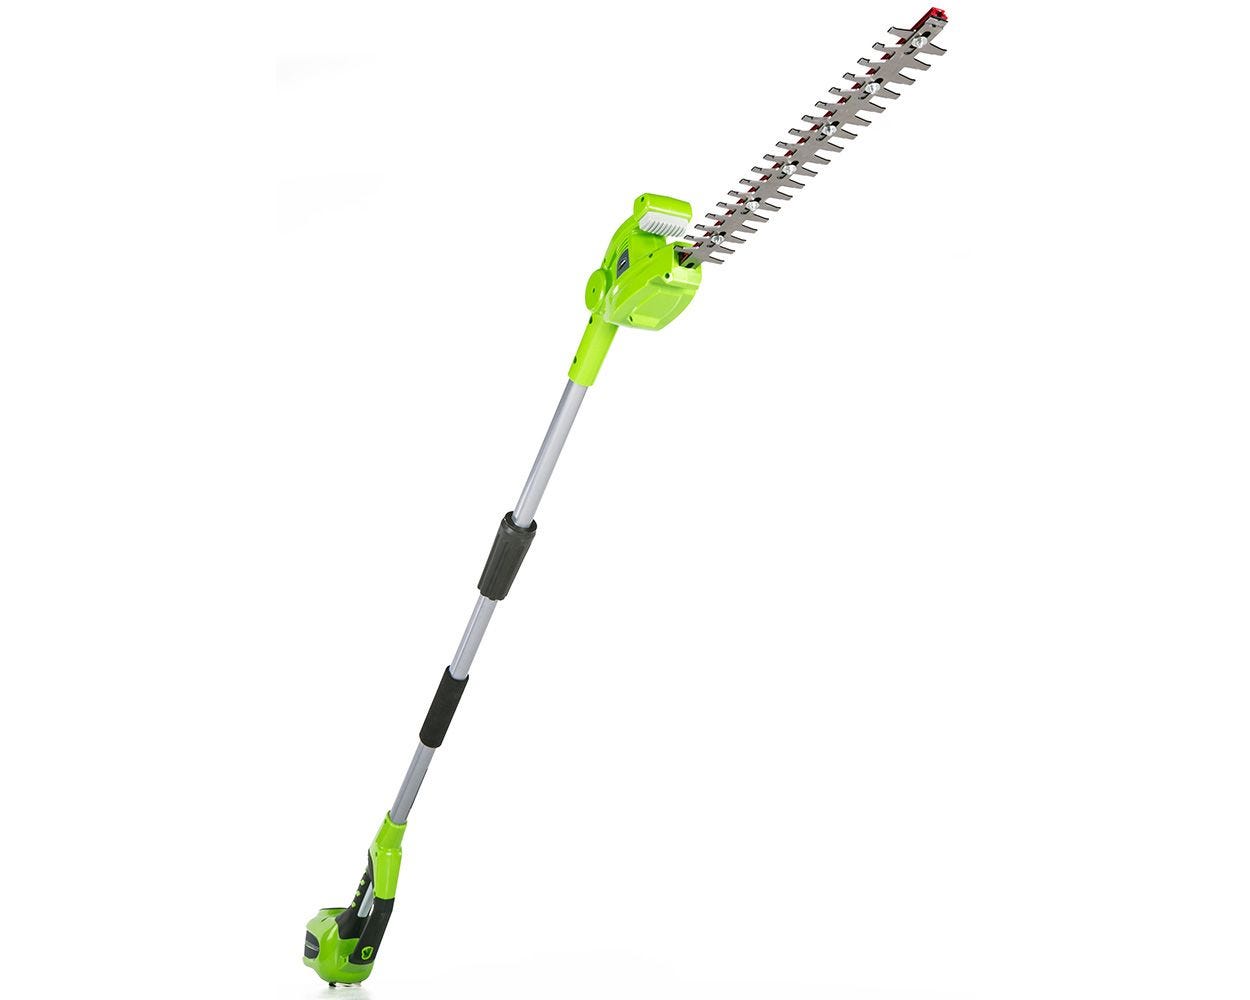 Greenworks PSPH40B210 8 inch 40V Cordless Pole Saw with Hedge Trimmer Attachment 2.0 Ah Battery Included